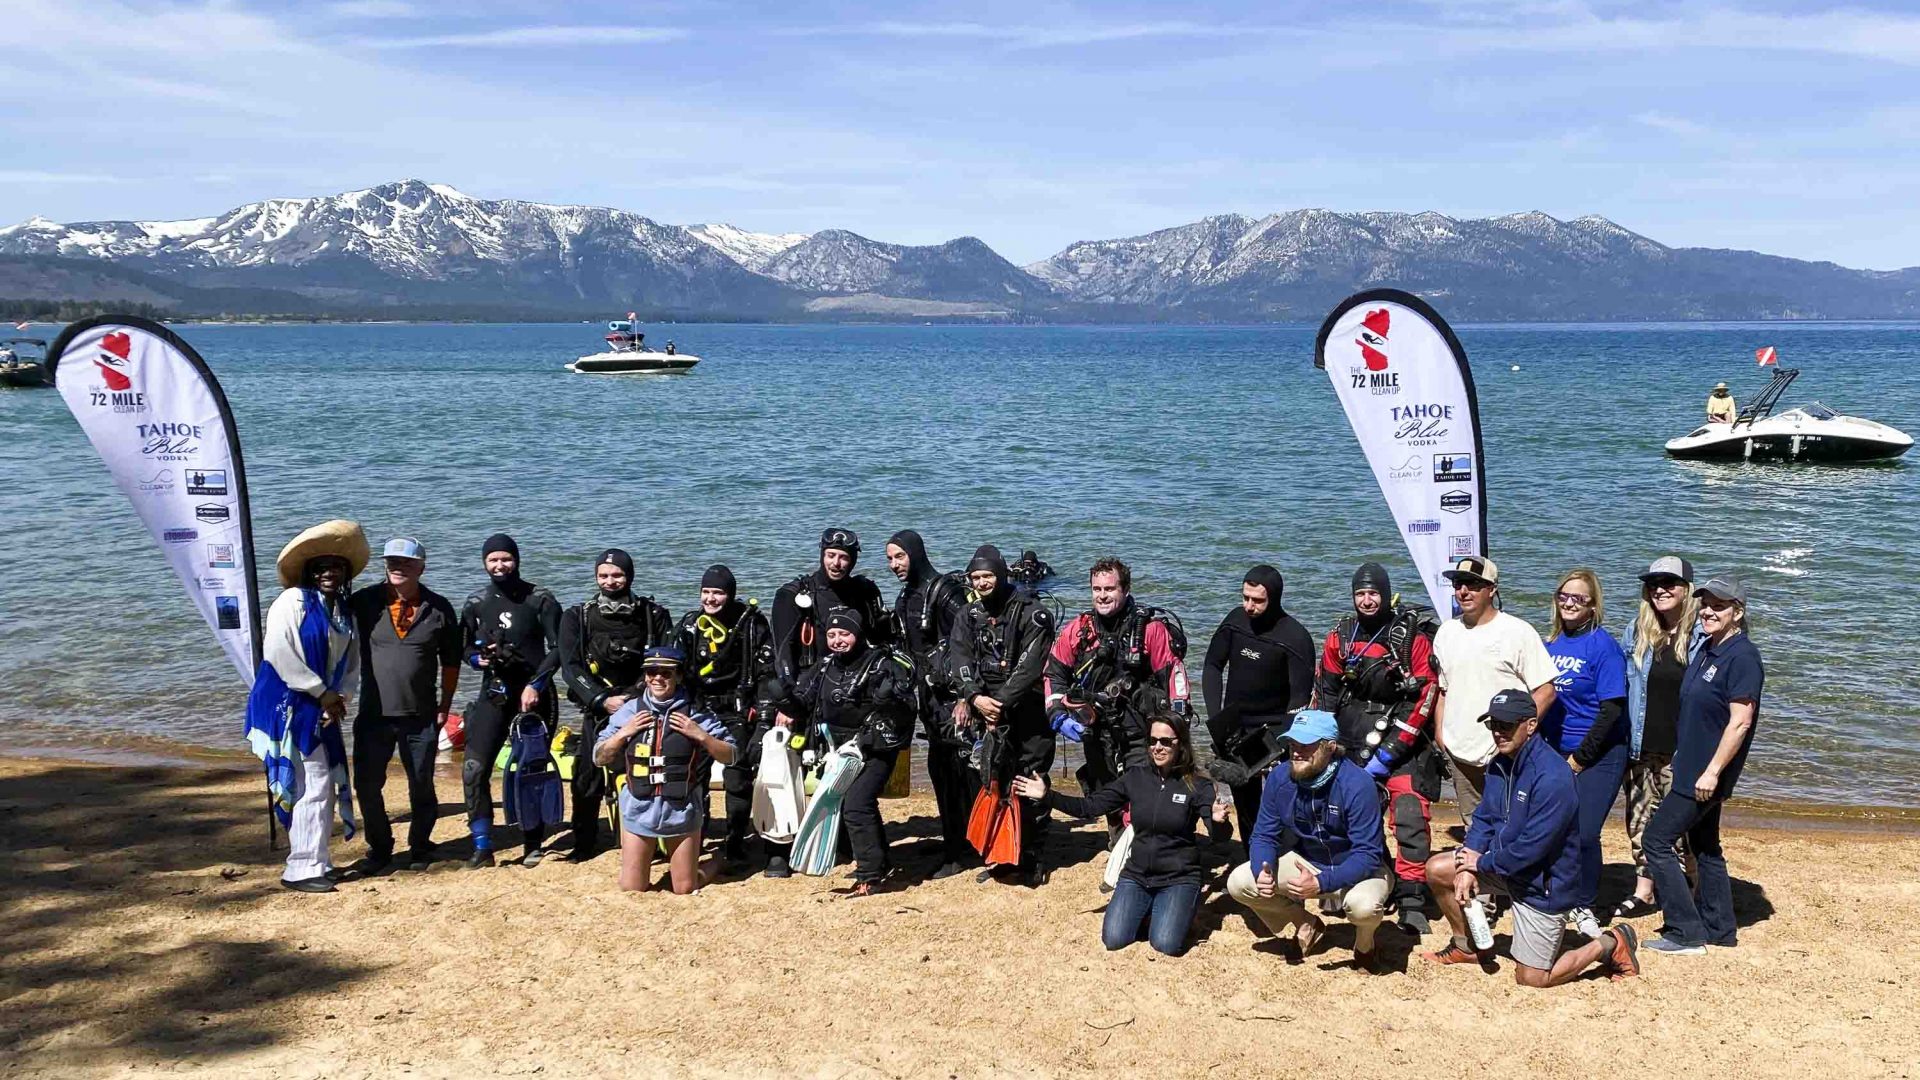 A group of divers smile for the camera on the shore of the lake.